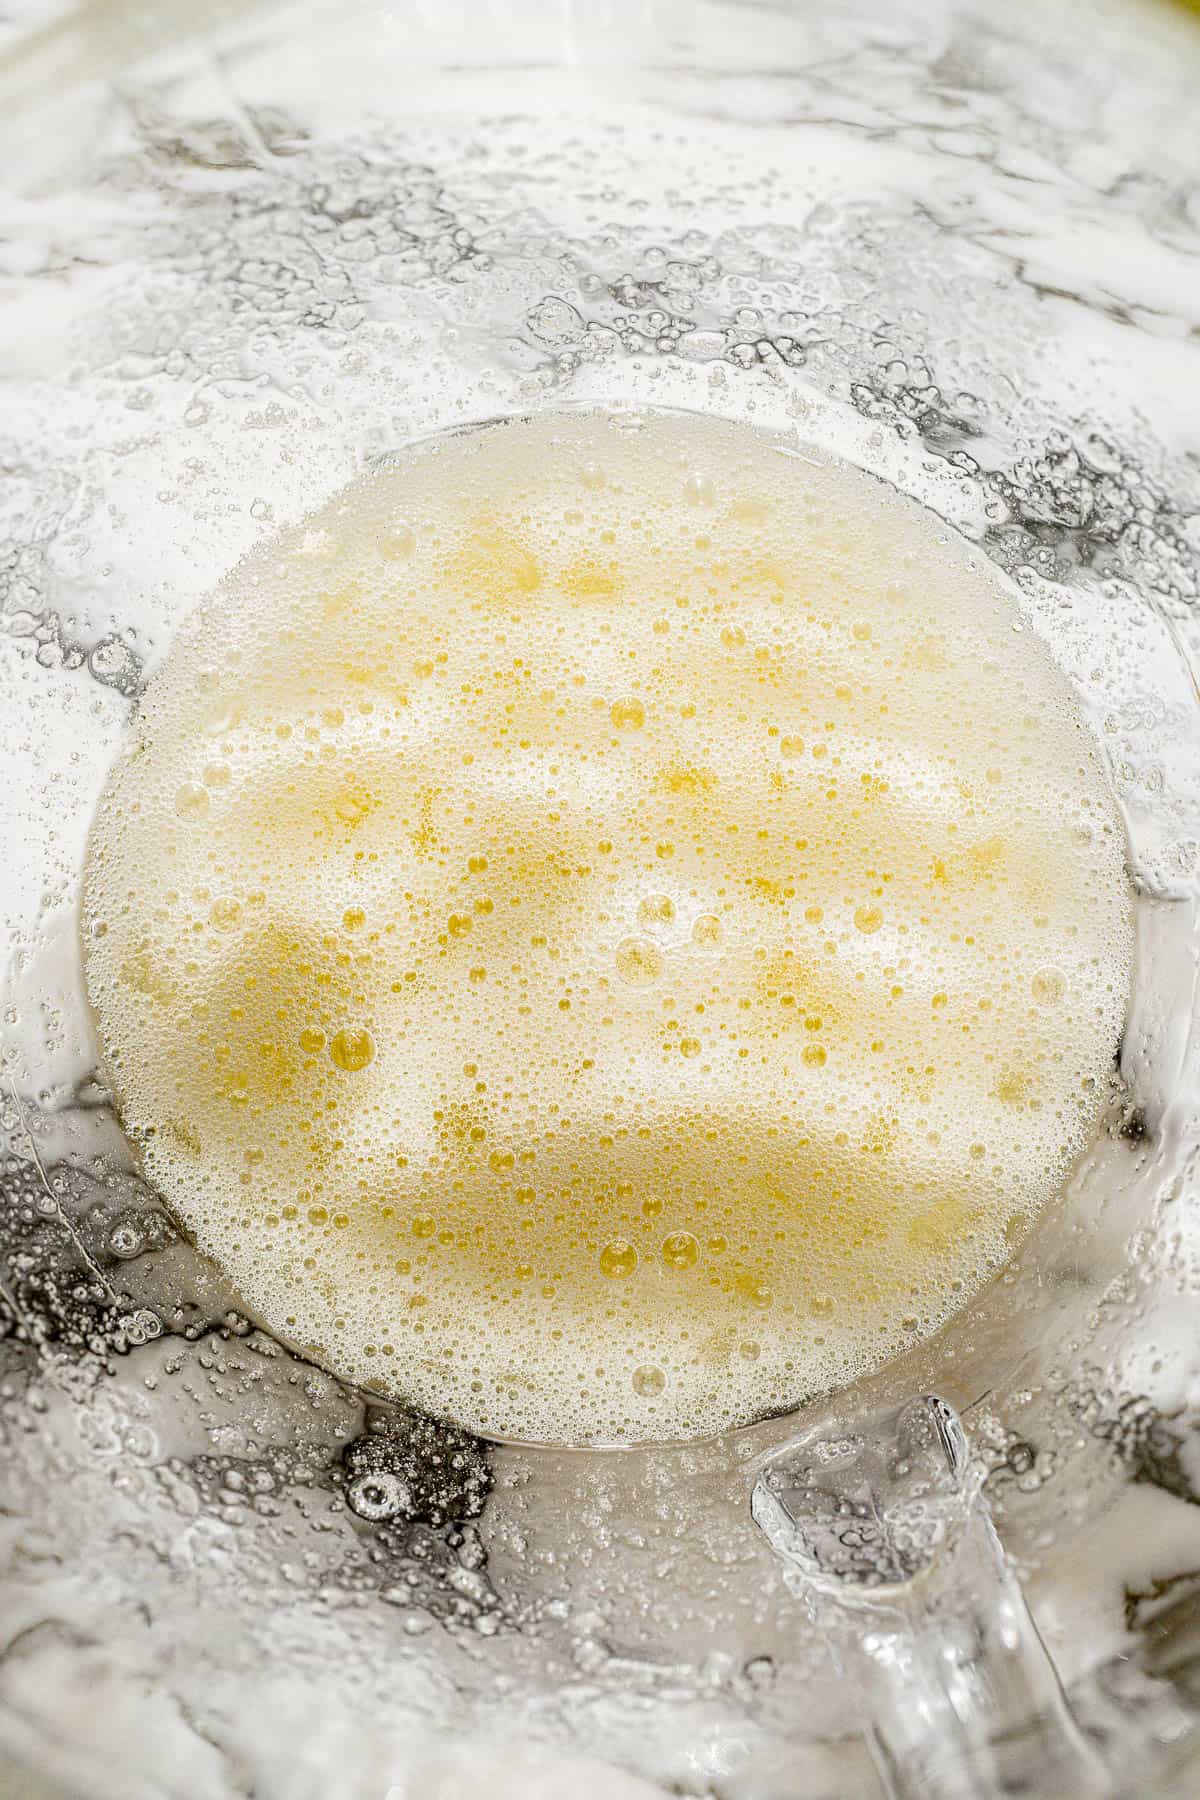 egg whites and sugar mixed in glass mixing bowl.